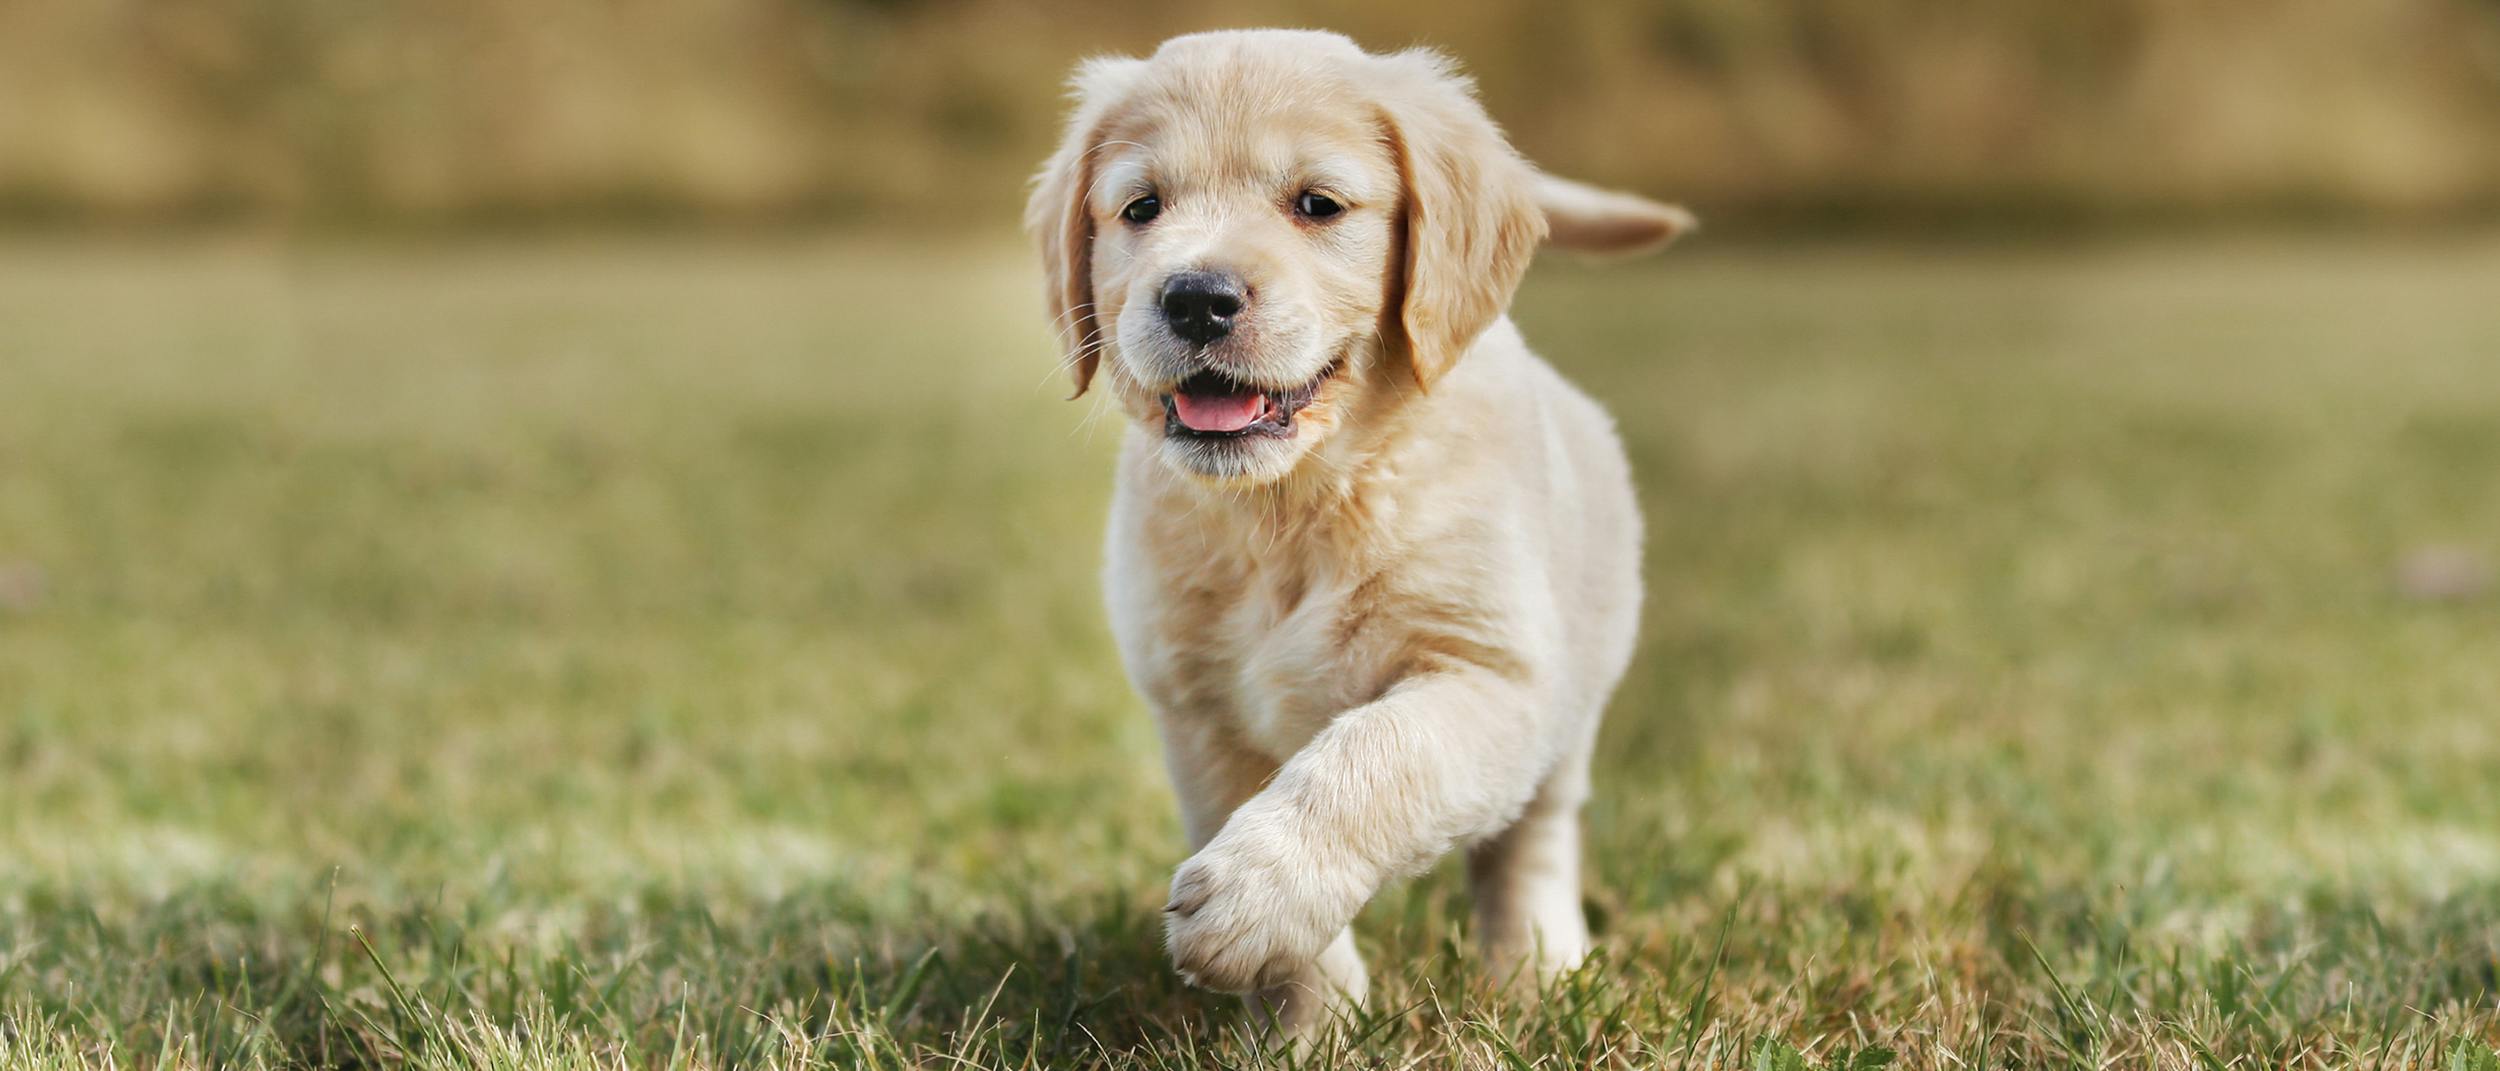 How to buy a puppy - ROYAL CANIN ® | Royal Canin